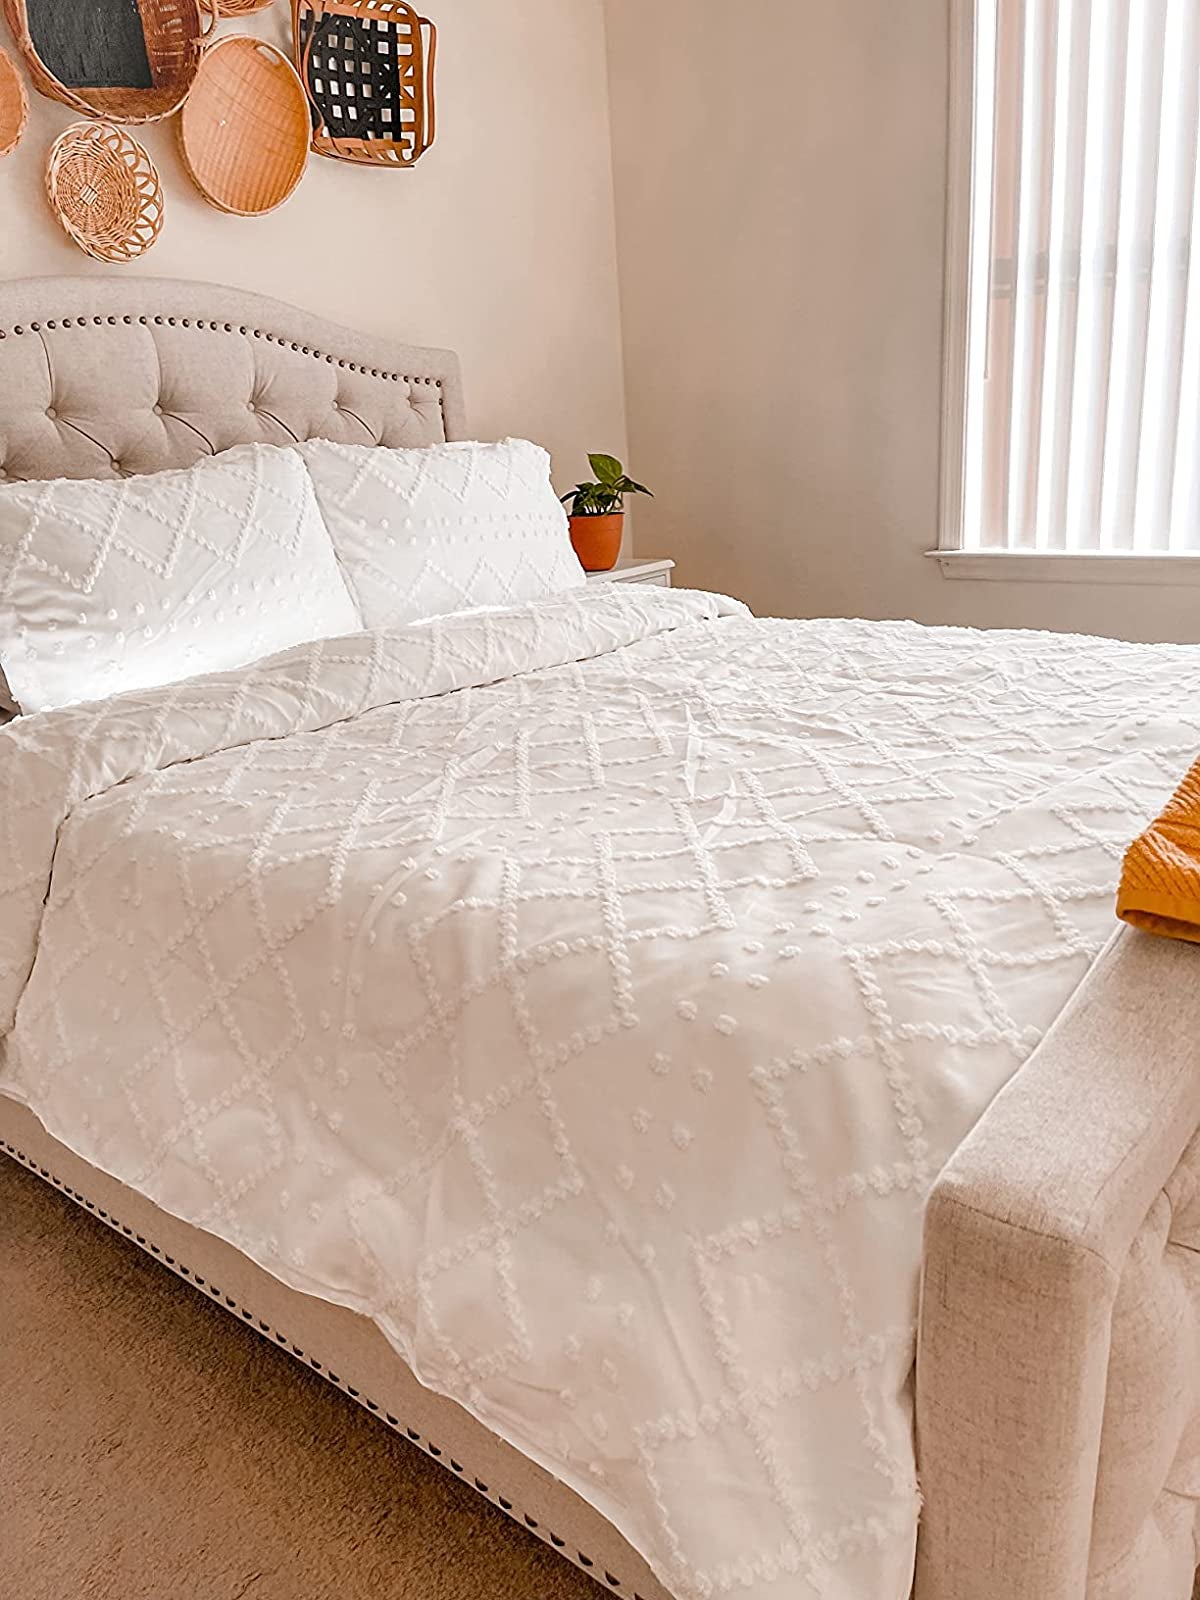 reviewer photo of the white duvet cover with a geometric dimensional diamond and dot pattern on it